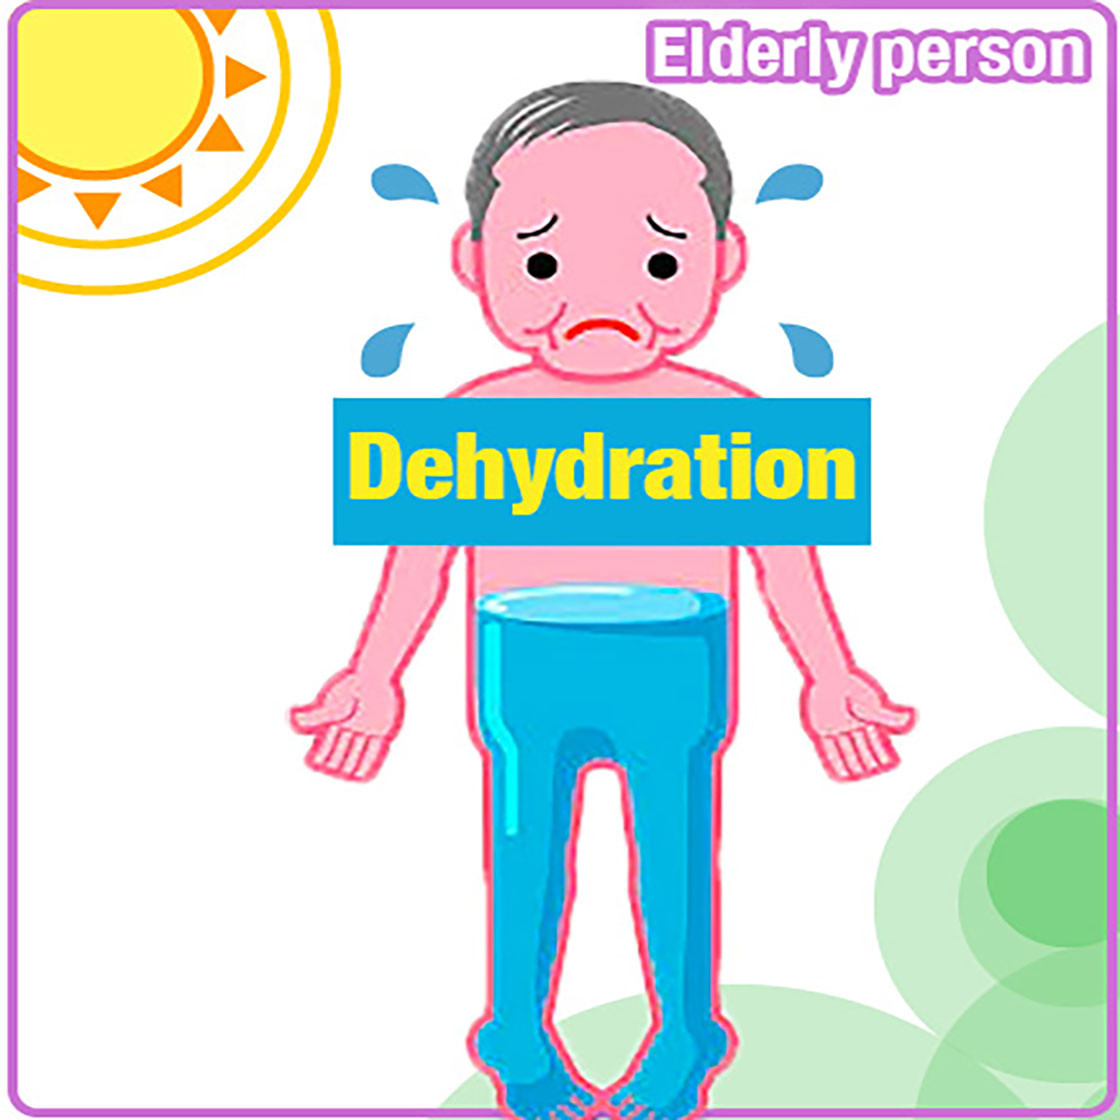 Risks of heatstroke for the elderly: causes and preventive measures